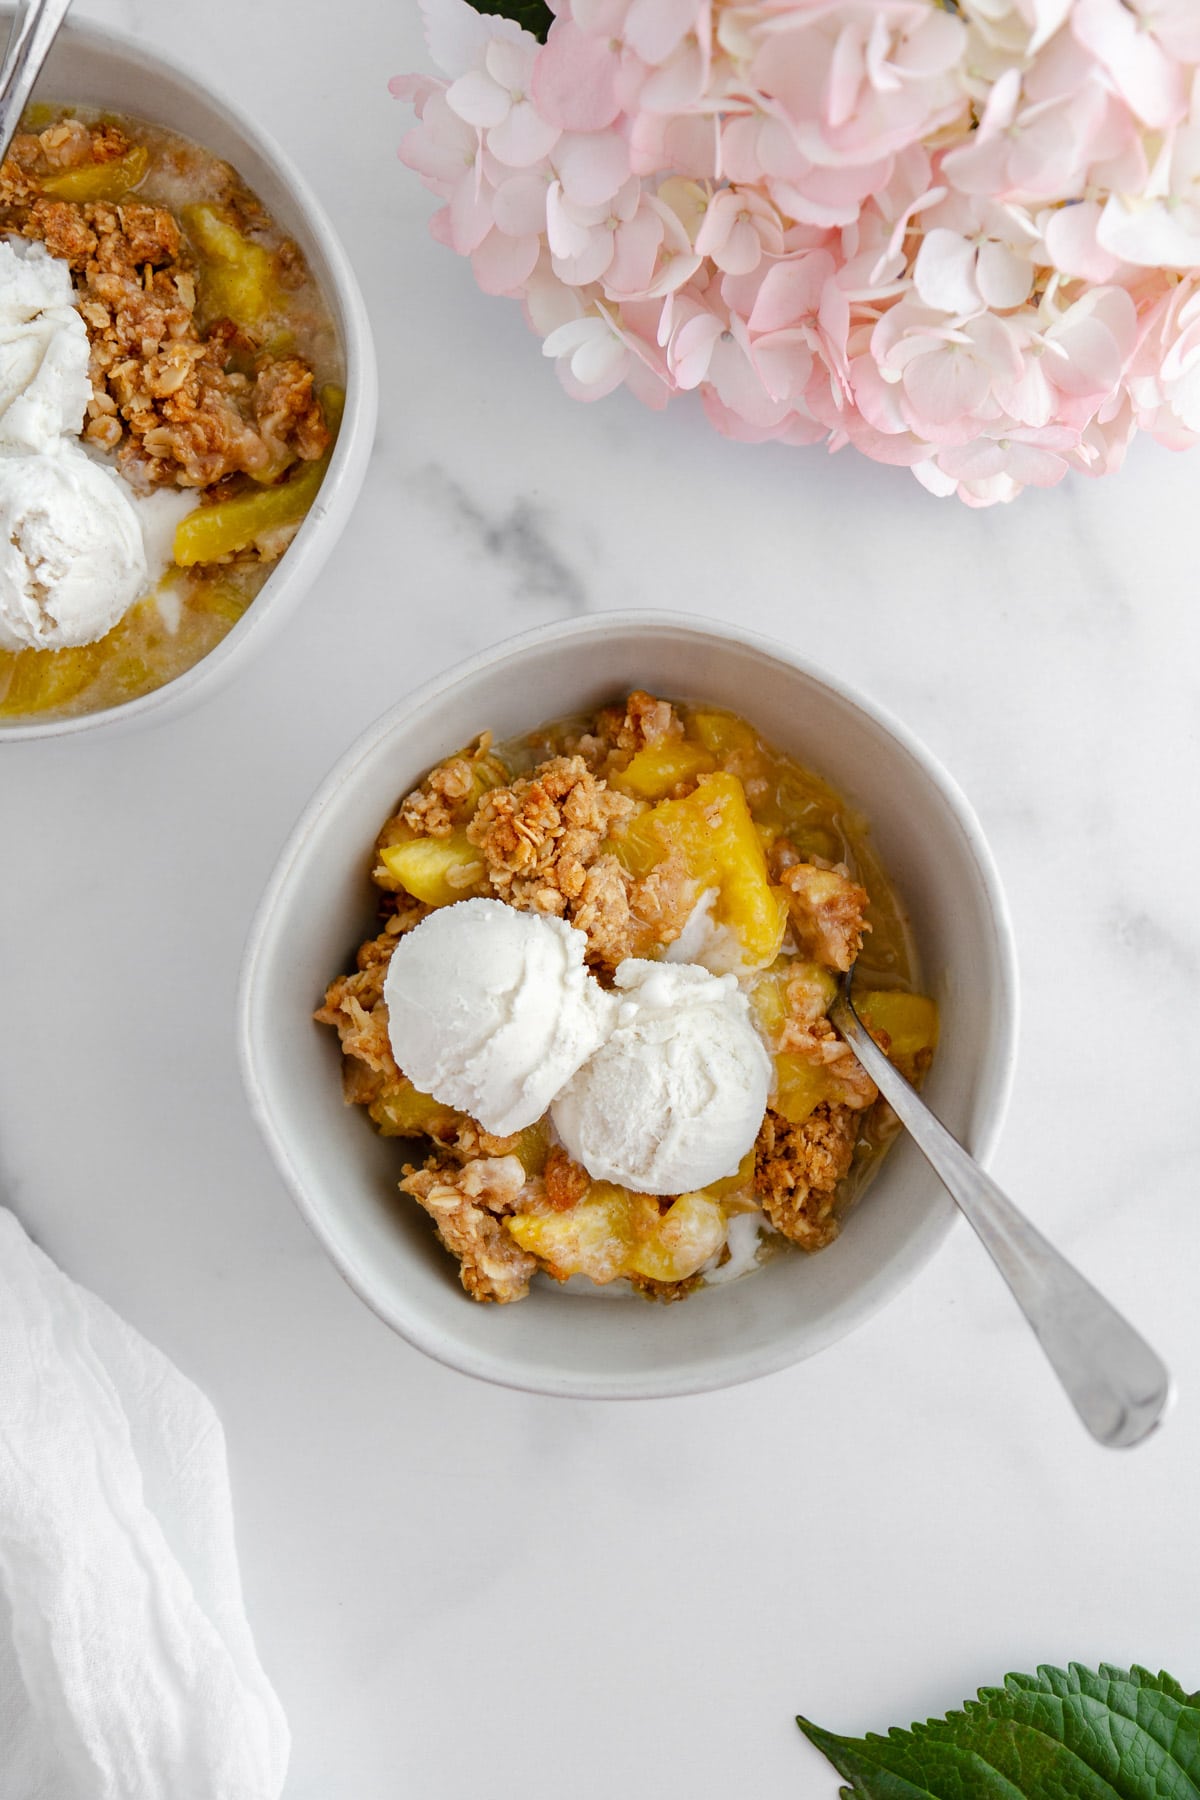 bowls of peach crisp with vanilla ice cream on a surface